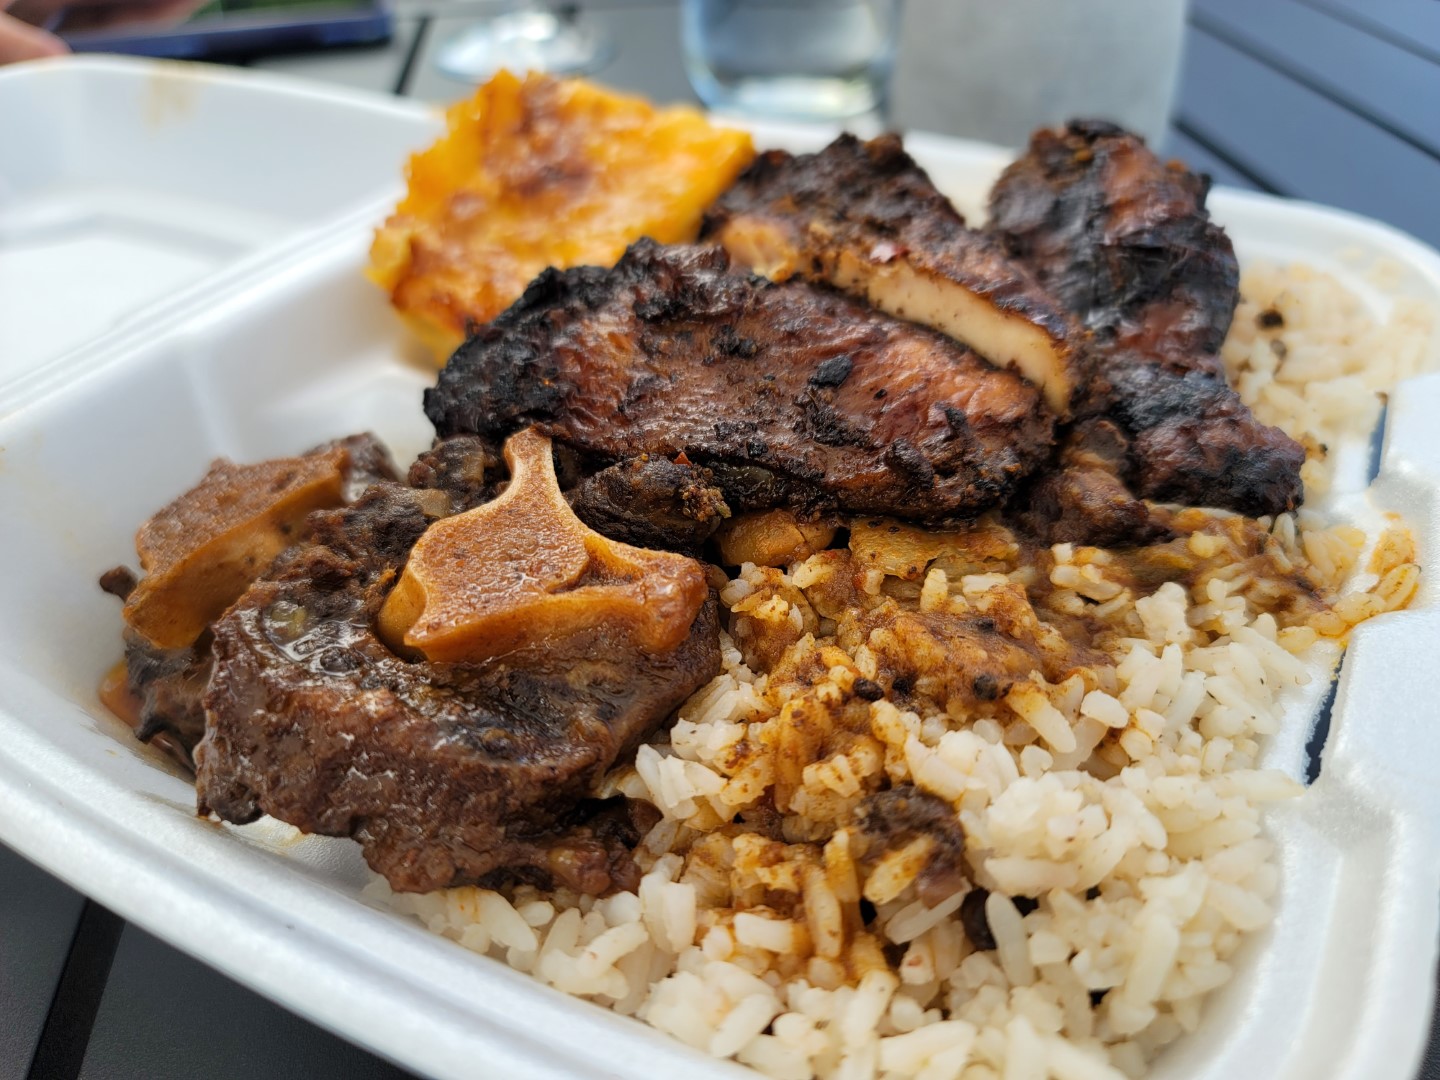 Oxtail Jerk Chicken and rice in Nova Scotia